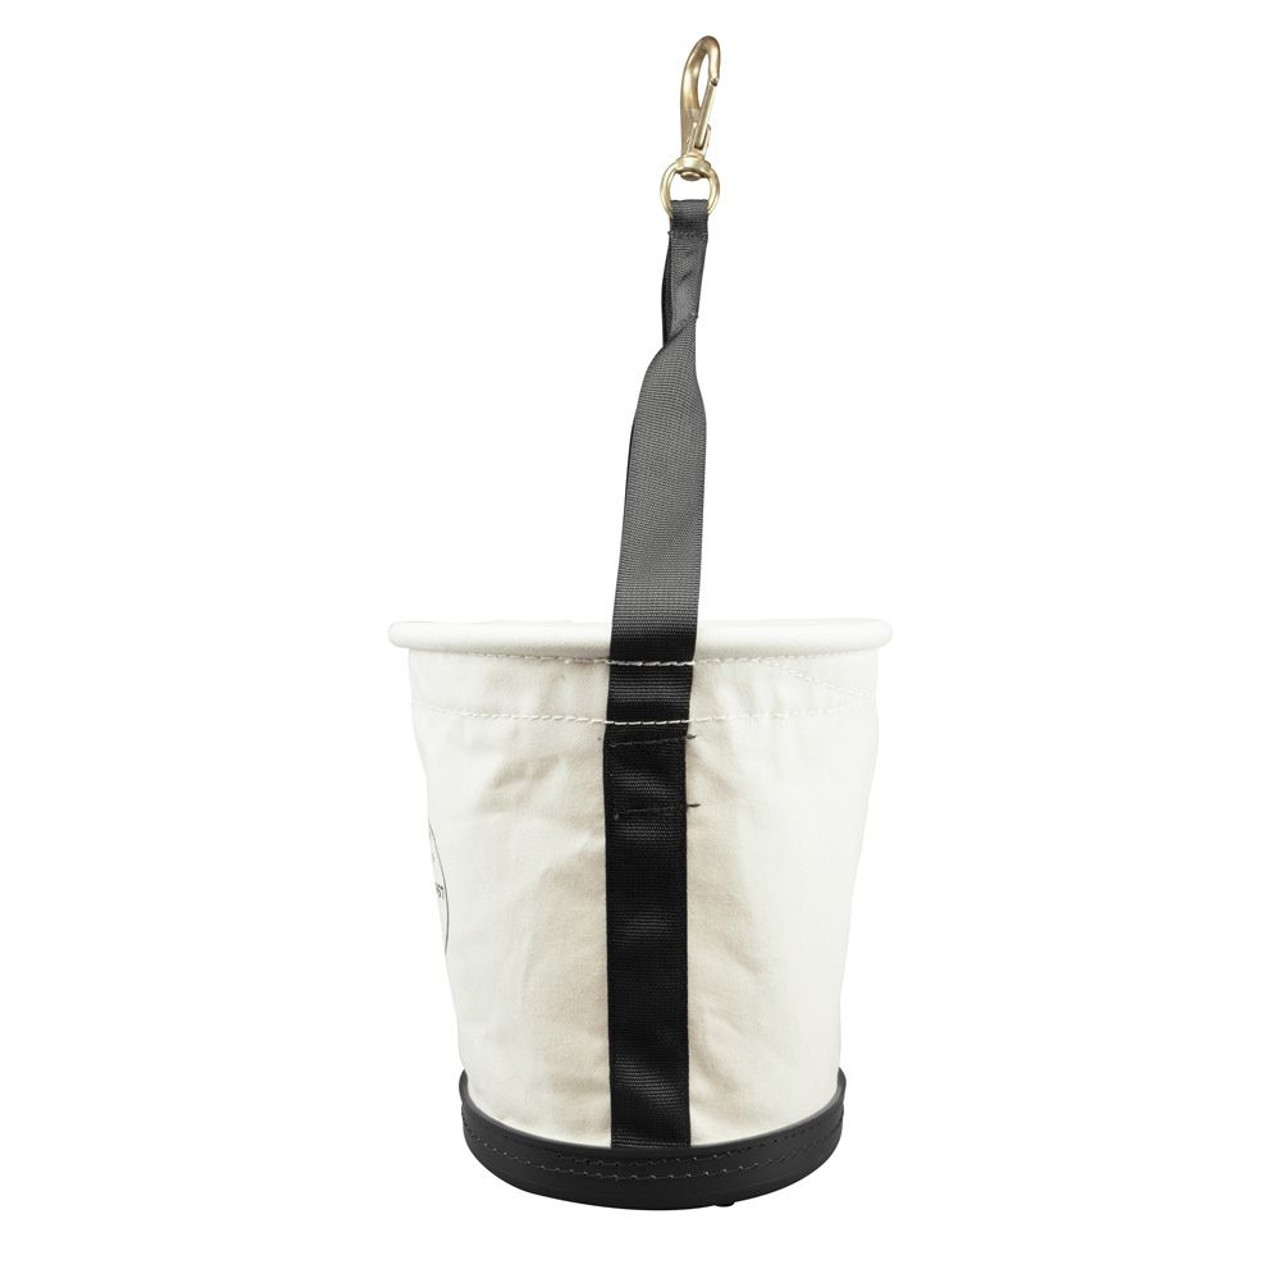 Tapered-Wall Canvas Bucket with Swivel Snap K-5113S 800-245-8339